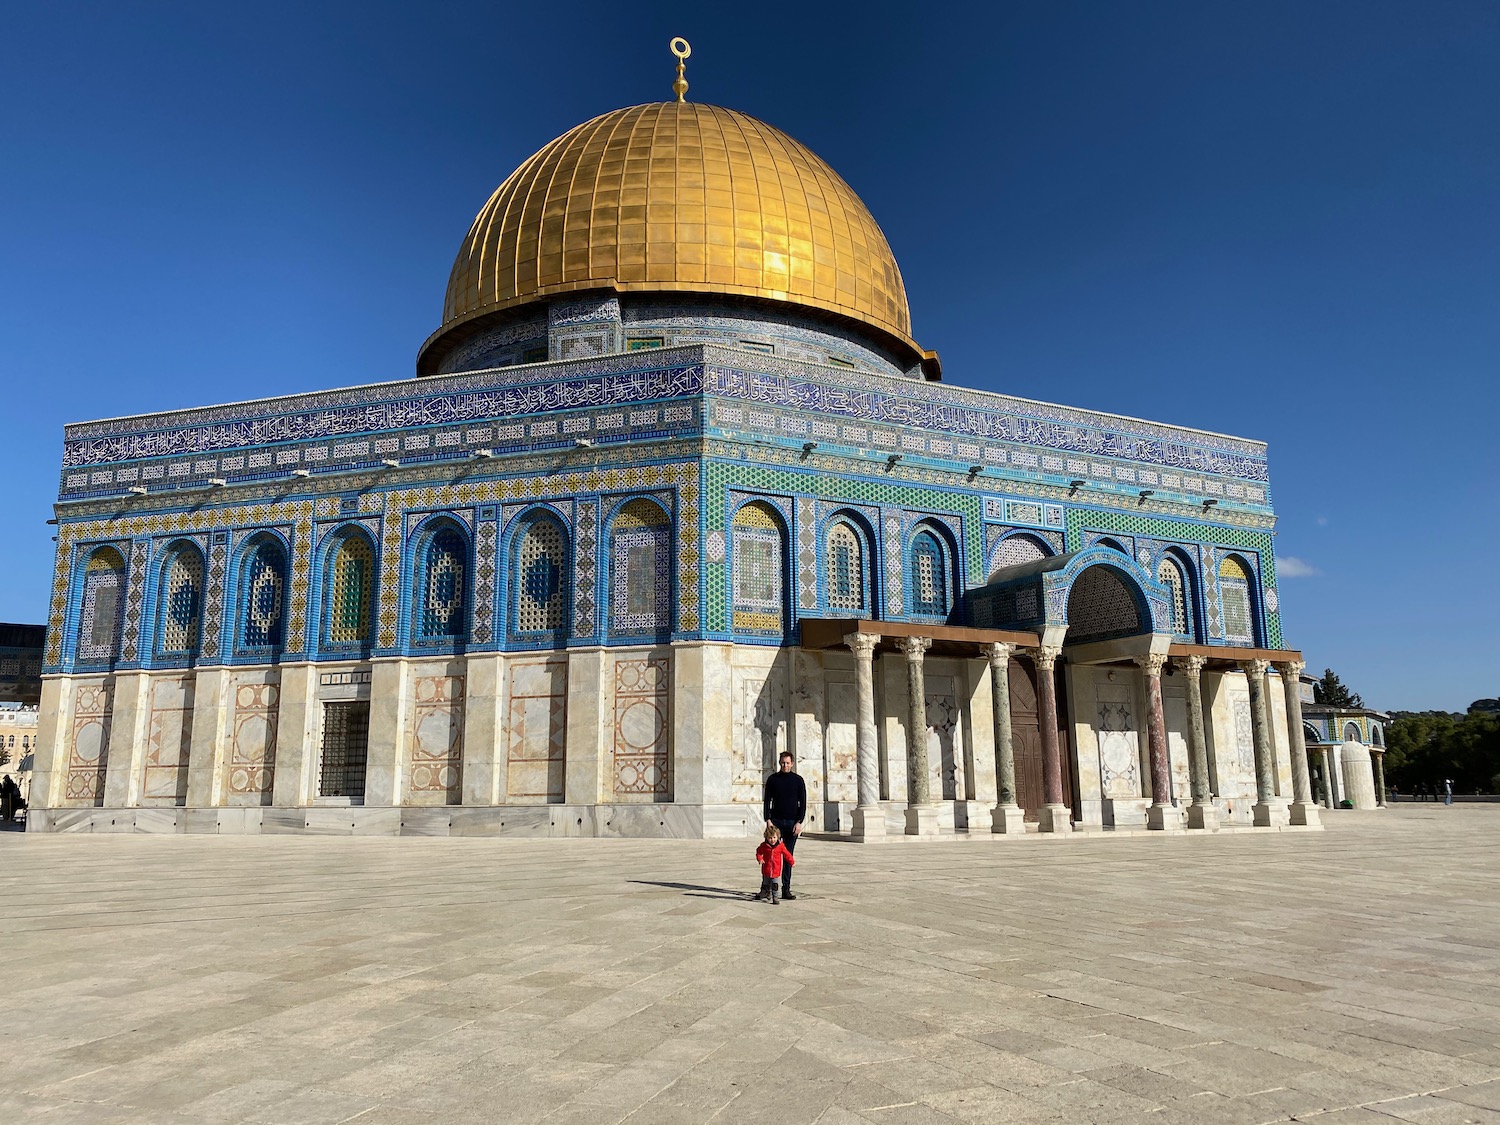 a man and a child standing in front of Dome of the Rock